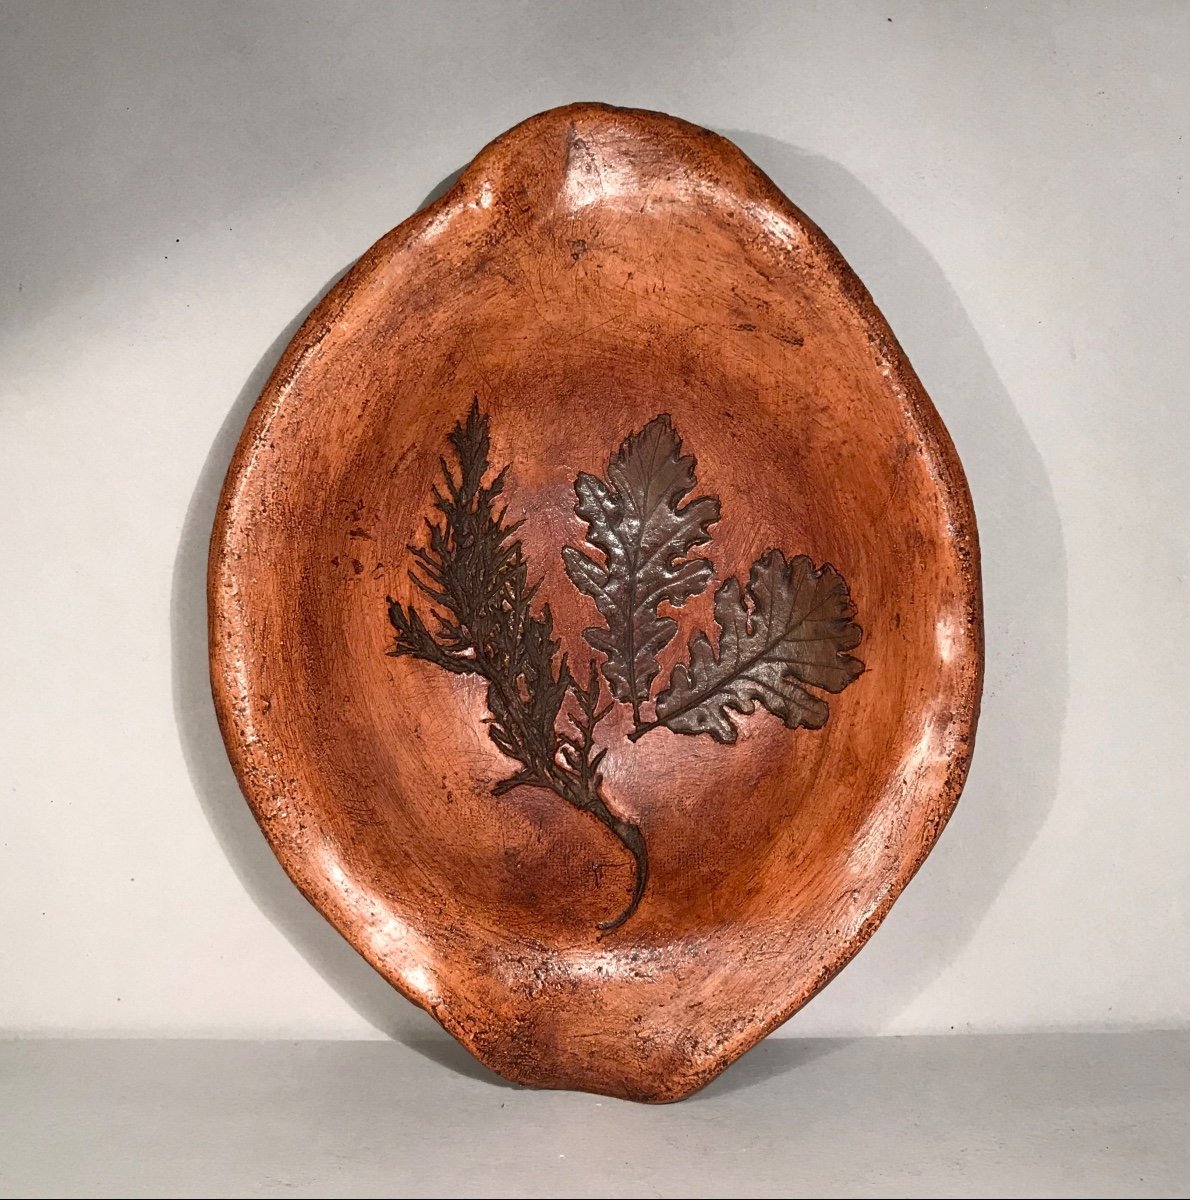 Popular Art Patinated Terracotta Dish With Plant Imprints Early 20th Century Haute-provence-photo-1